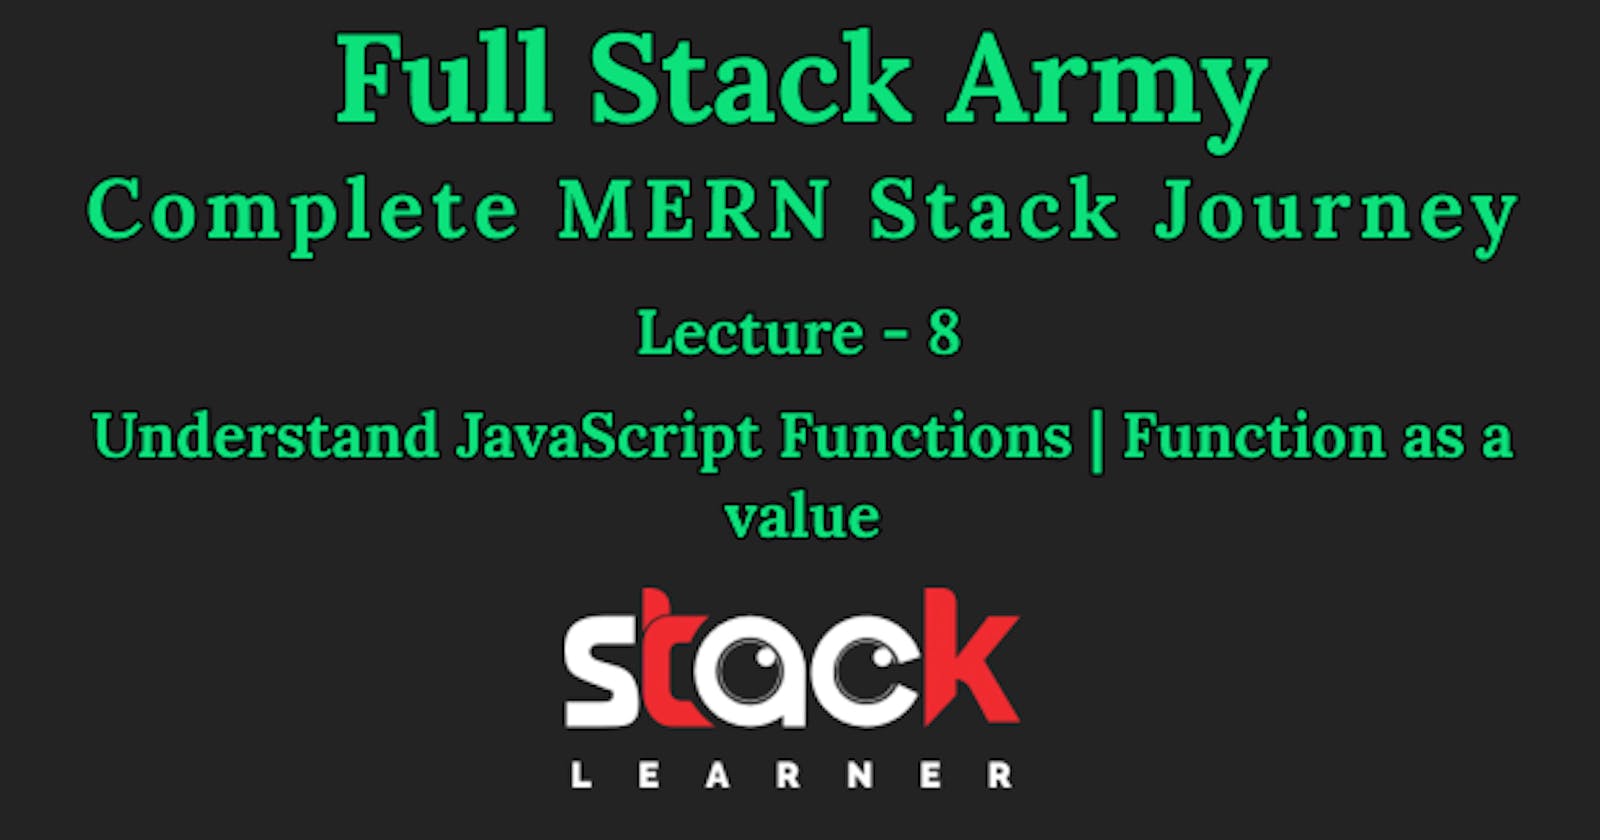 Lecture 8 - Understand JavaScript Functions | Function as a value